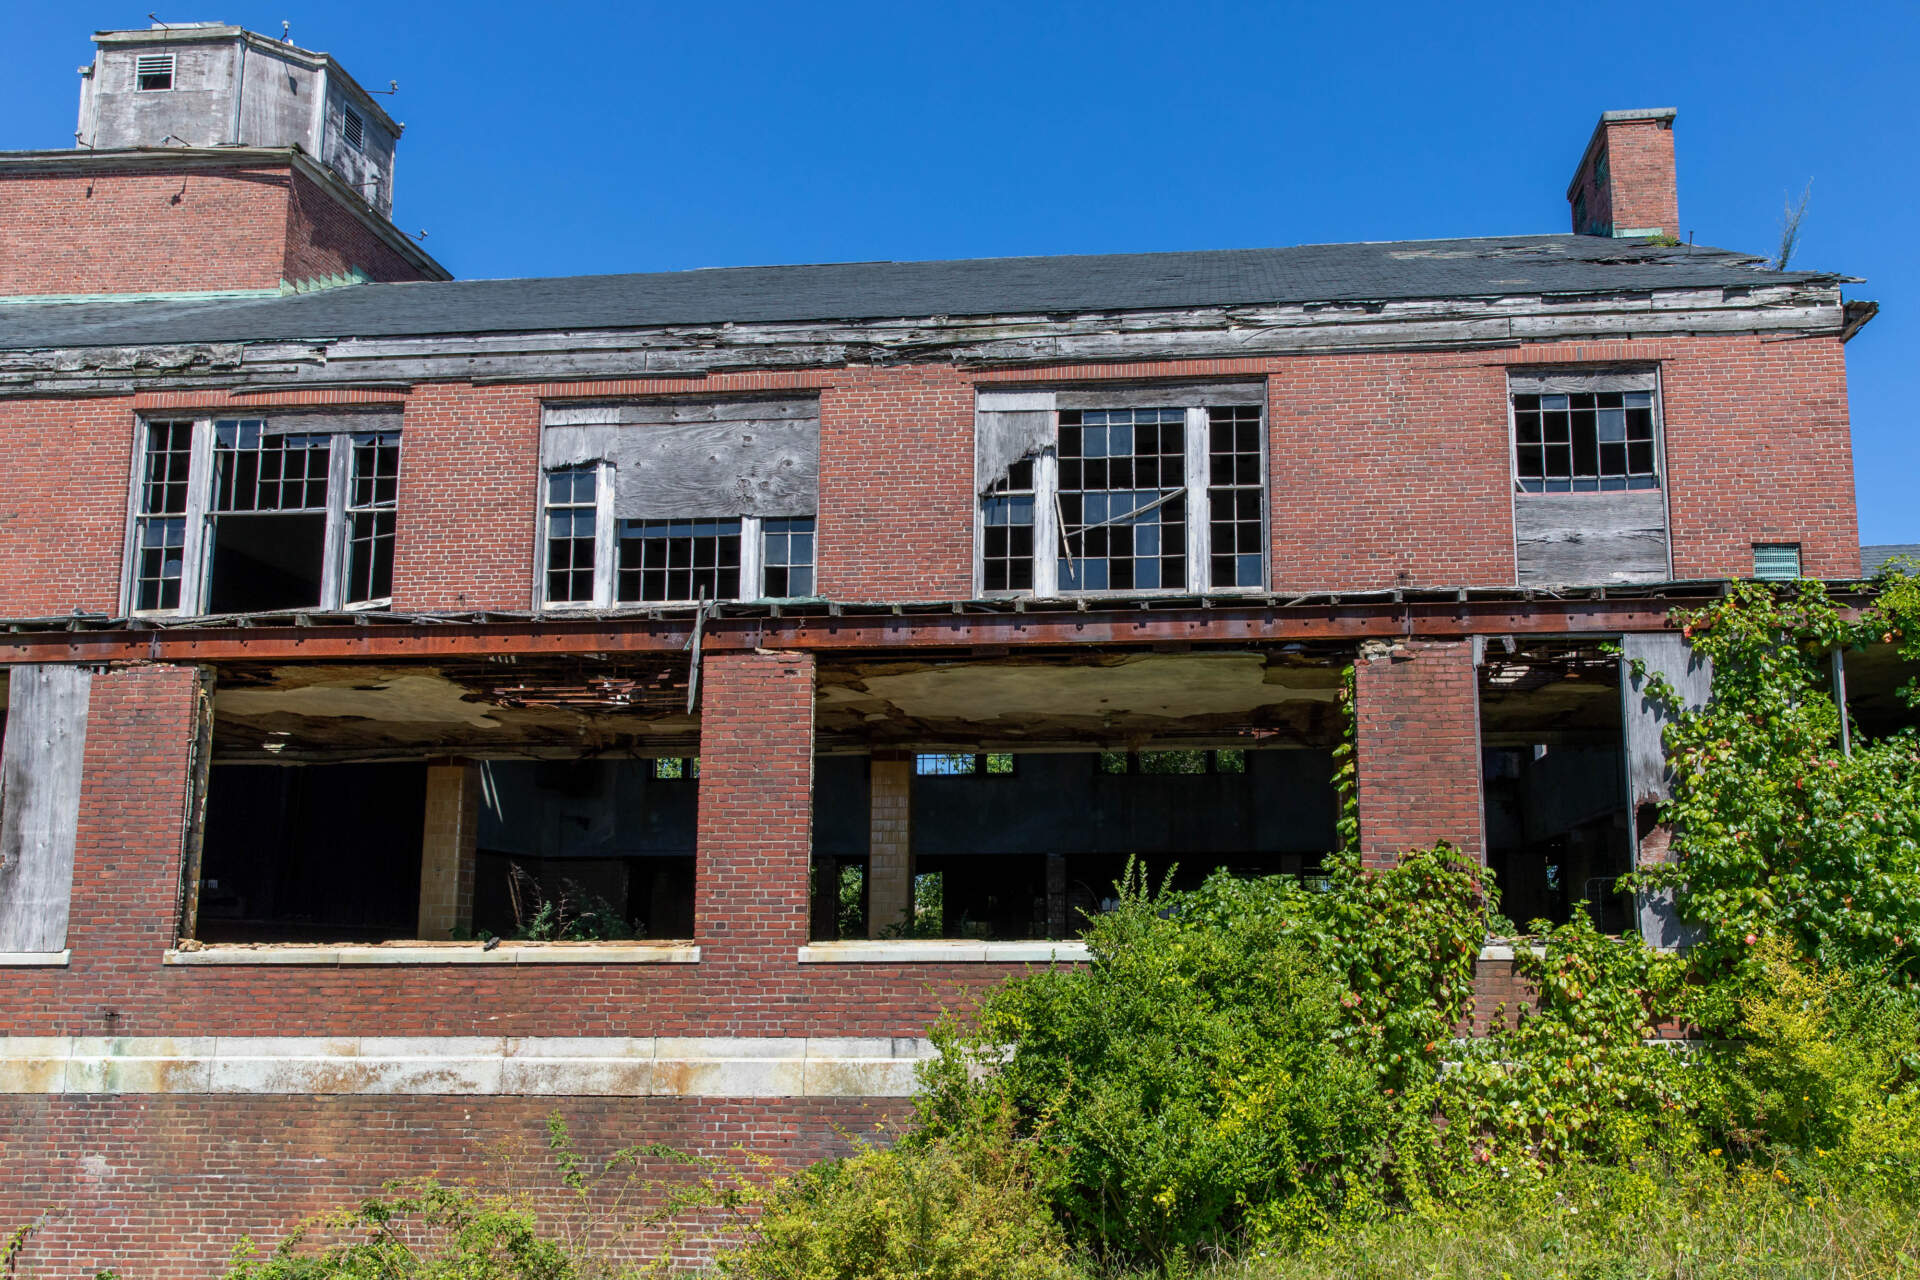 There are broken windows along one of the buildings on the former Long Island recovery campus. (Mayor’s Office Photo by Mike Mejia)